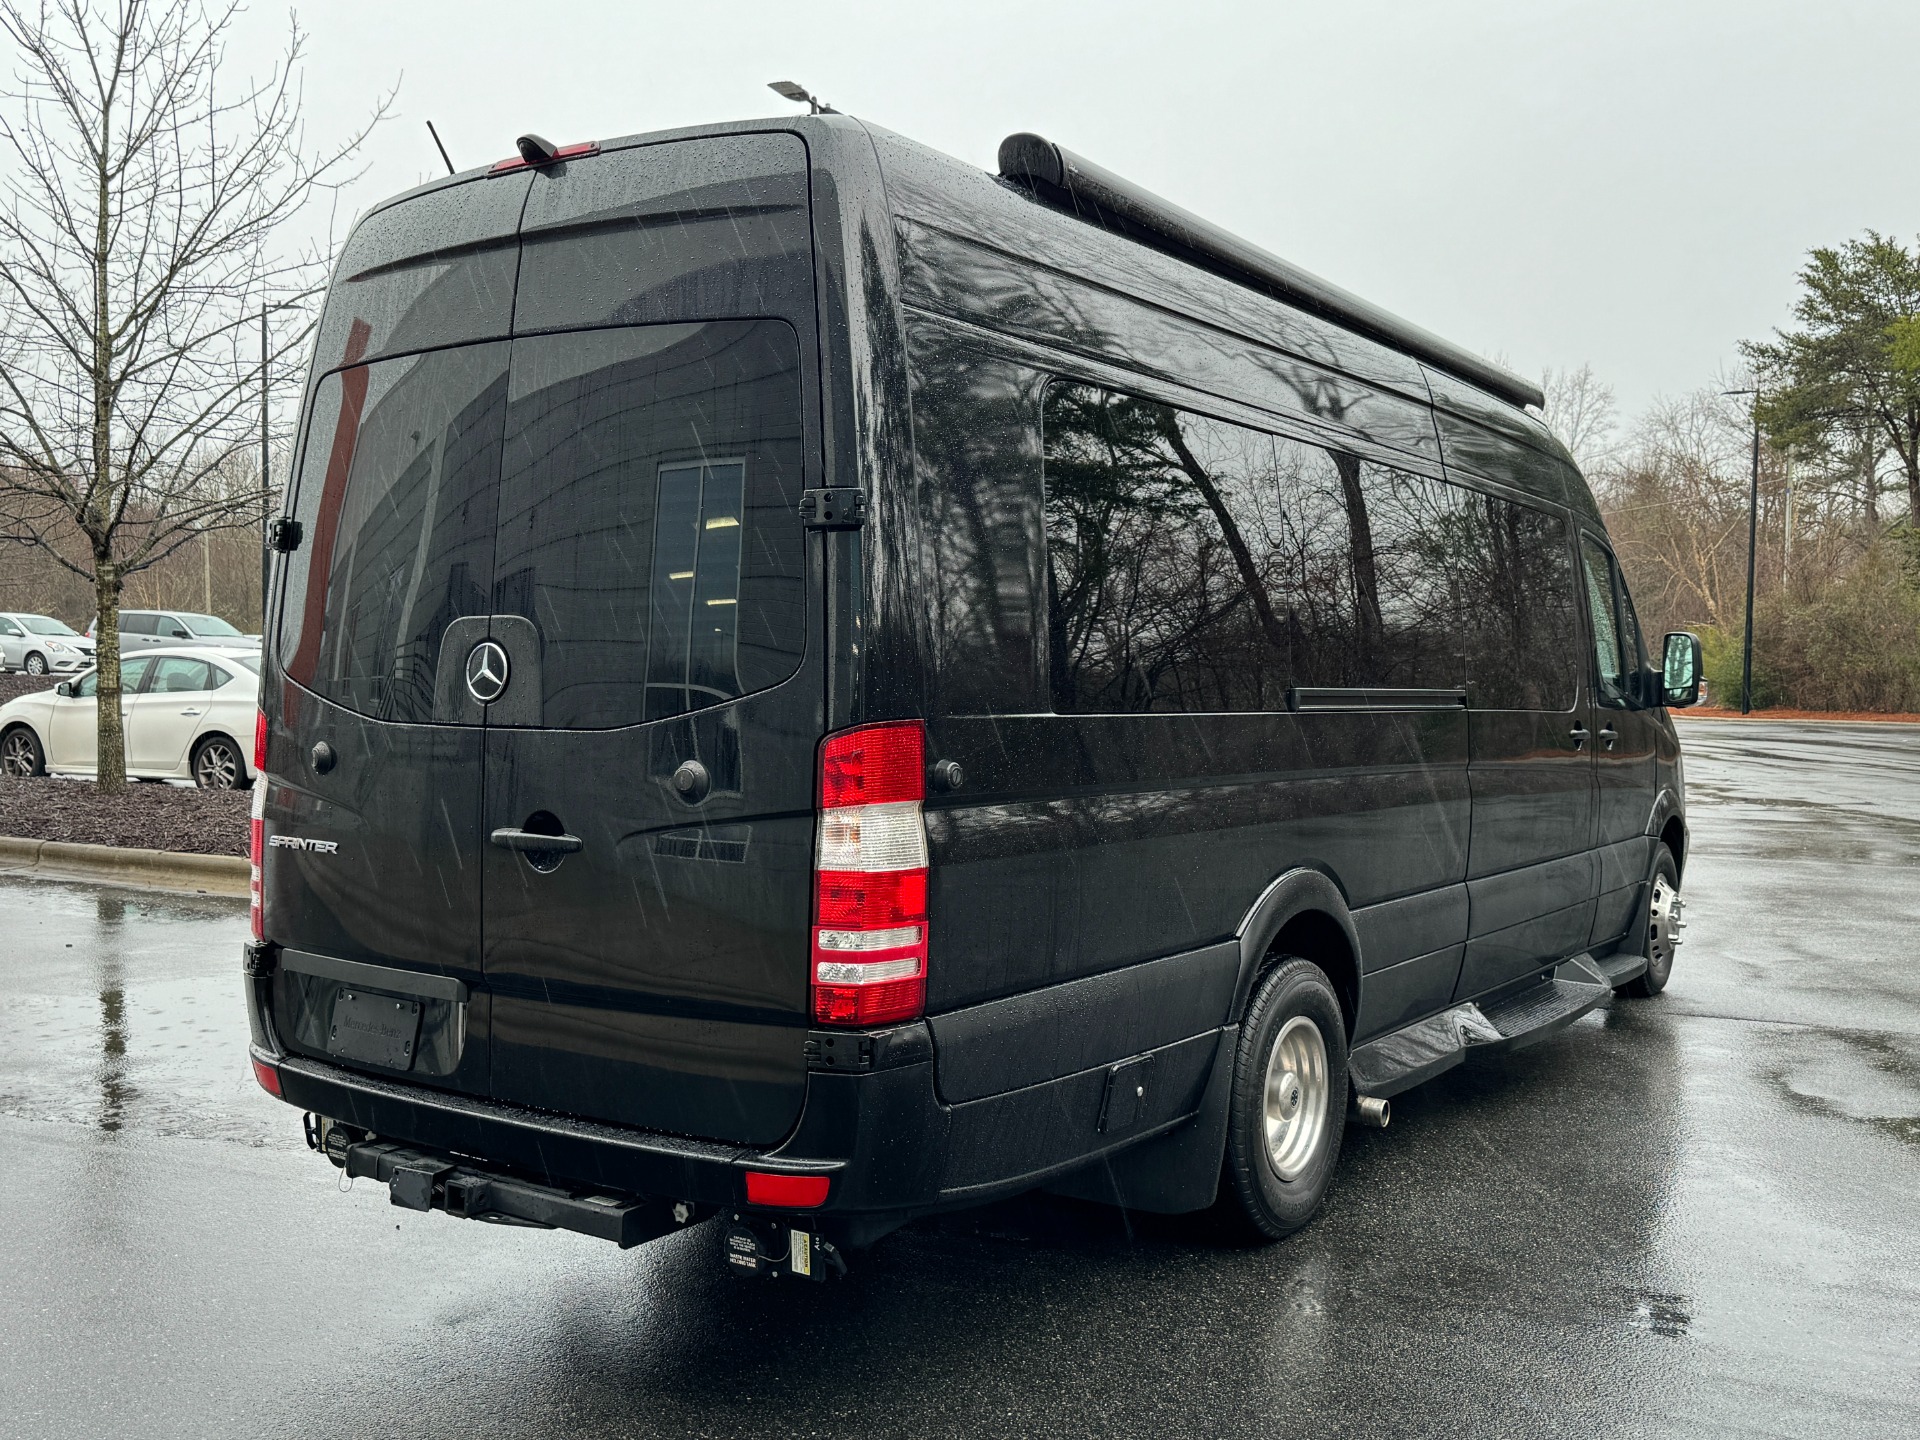 Used 2017 Mercedes-Benz Sprinter Cargo Van MIDWEST JET VAN CONVERSION for sale $120,000 at Formula Imports in Charlotte NC 28227 9